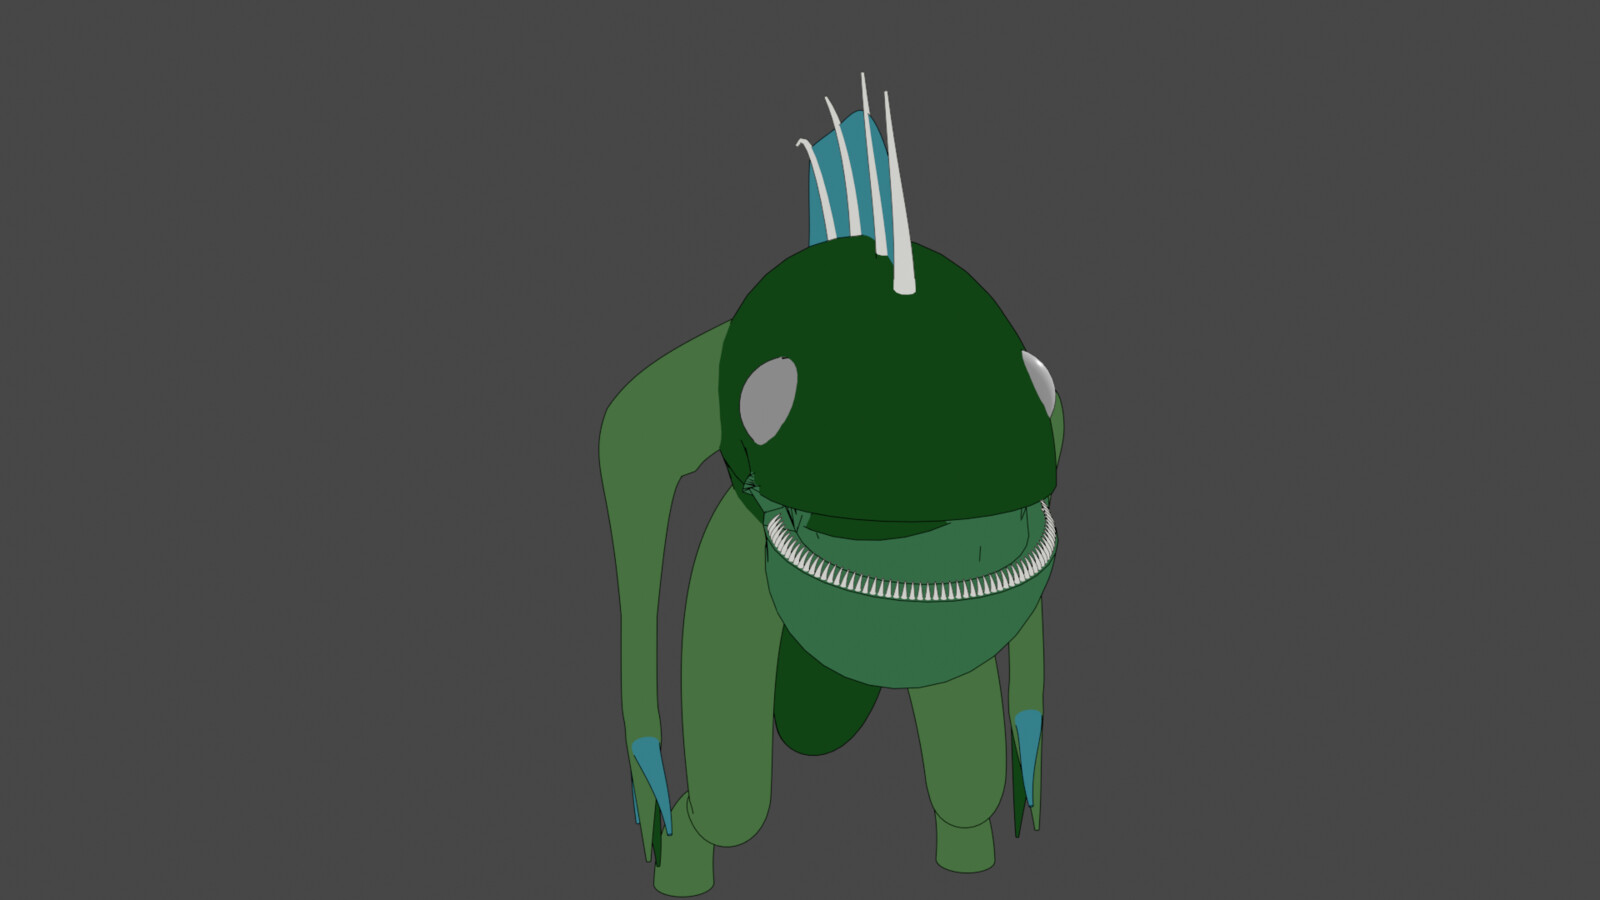 Here's an alternate angle of the initial vision of the deep one. Note that it's missing whiskers and has no gills, as of yet—I wanted to get the energy and flow of my initial vision going first. This is likely only one subclass of them, but we'll see.